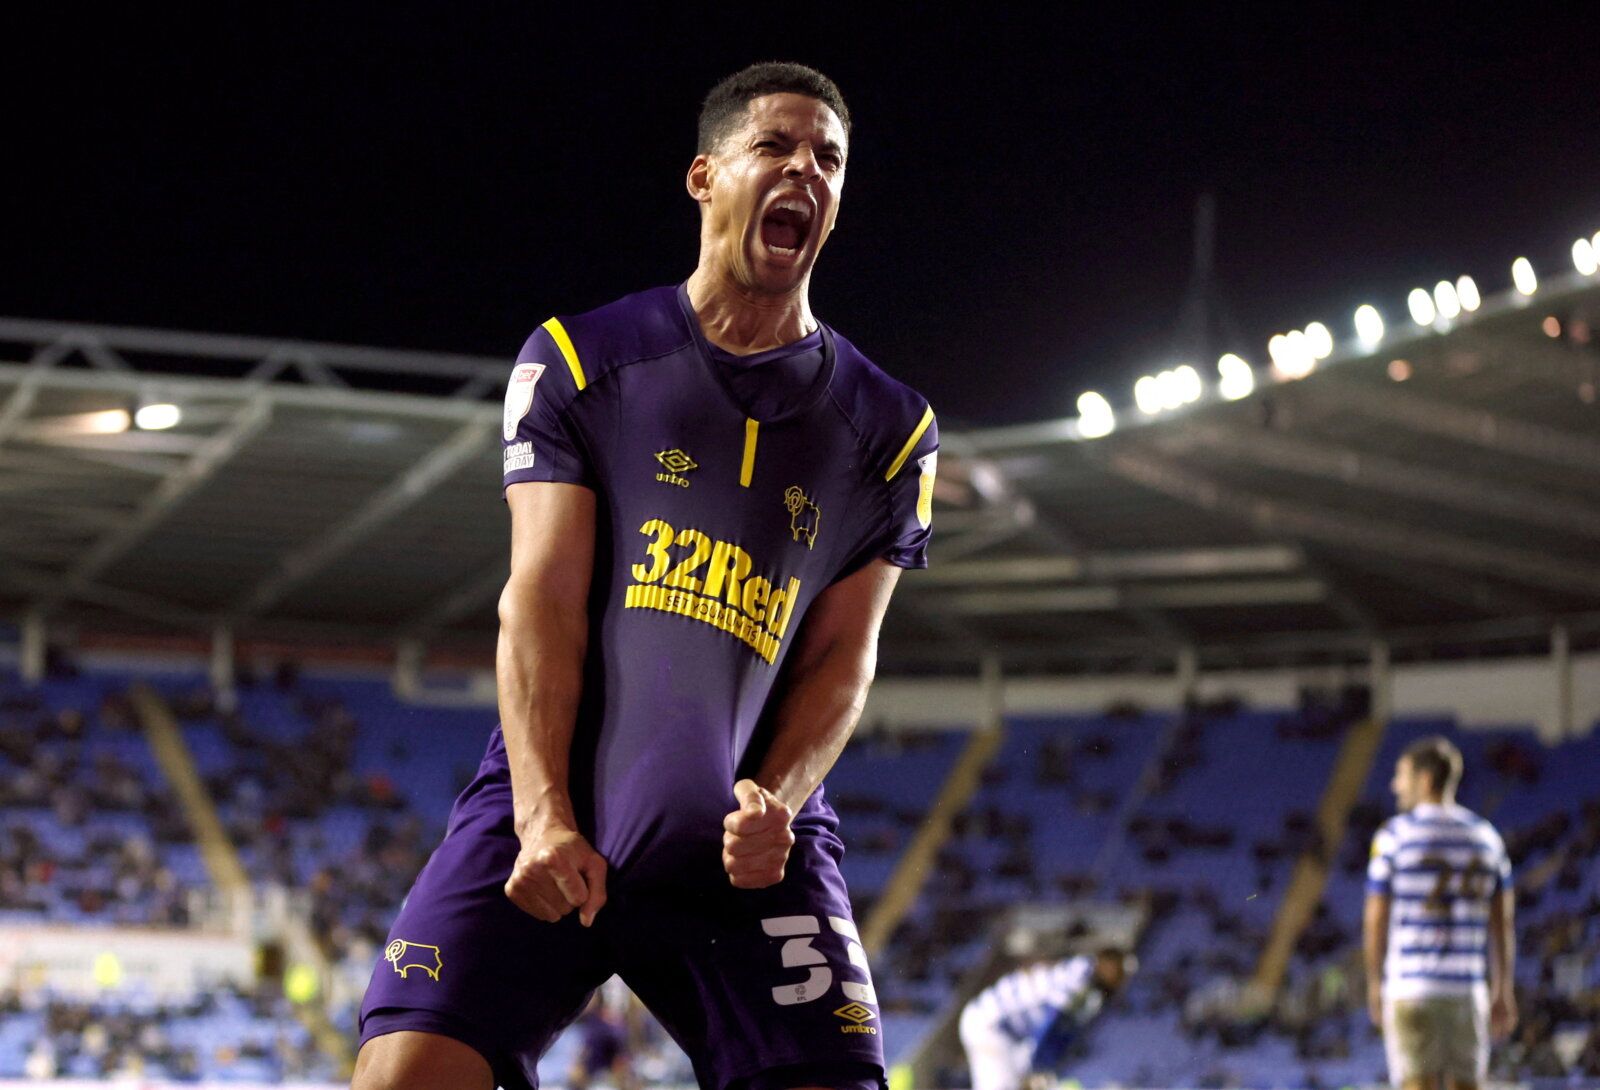 Soccer Football - Championship - Reading v Derby County - Madejski Stadium, Reading, Britain - January 3, 2022 Derby County's Curtis Davies celebrates scoring their second goal  Action Images/John Sibley  EDITORIAL USE ONLY. No use with unauthorized audio, video, data, fixture lists, club/league logos or 